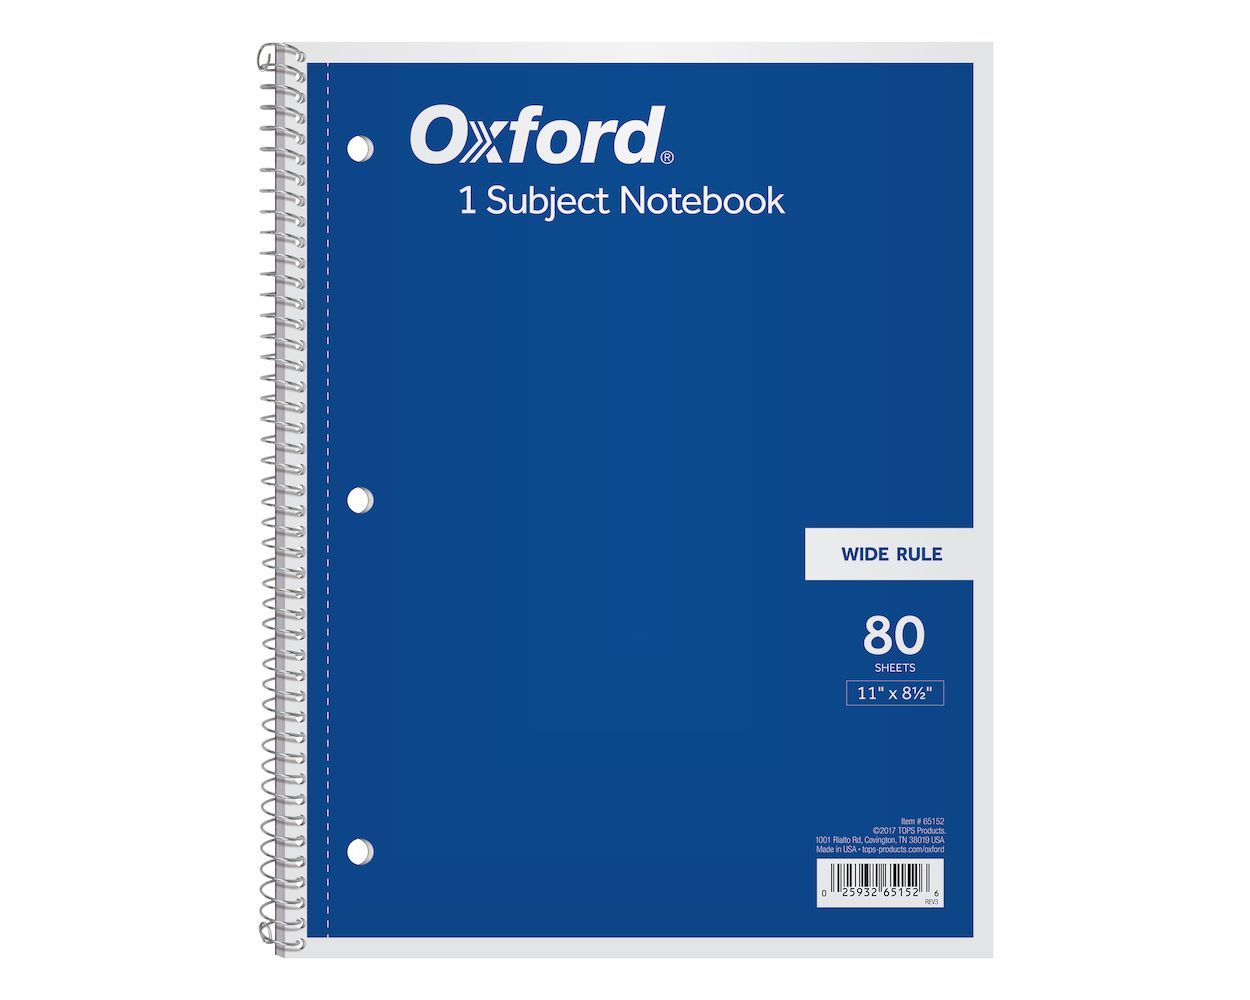 Oxford 1-Subject Notebook, 8-1/2" x 11", Wide Rule, 80 Sheets